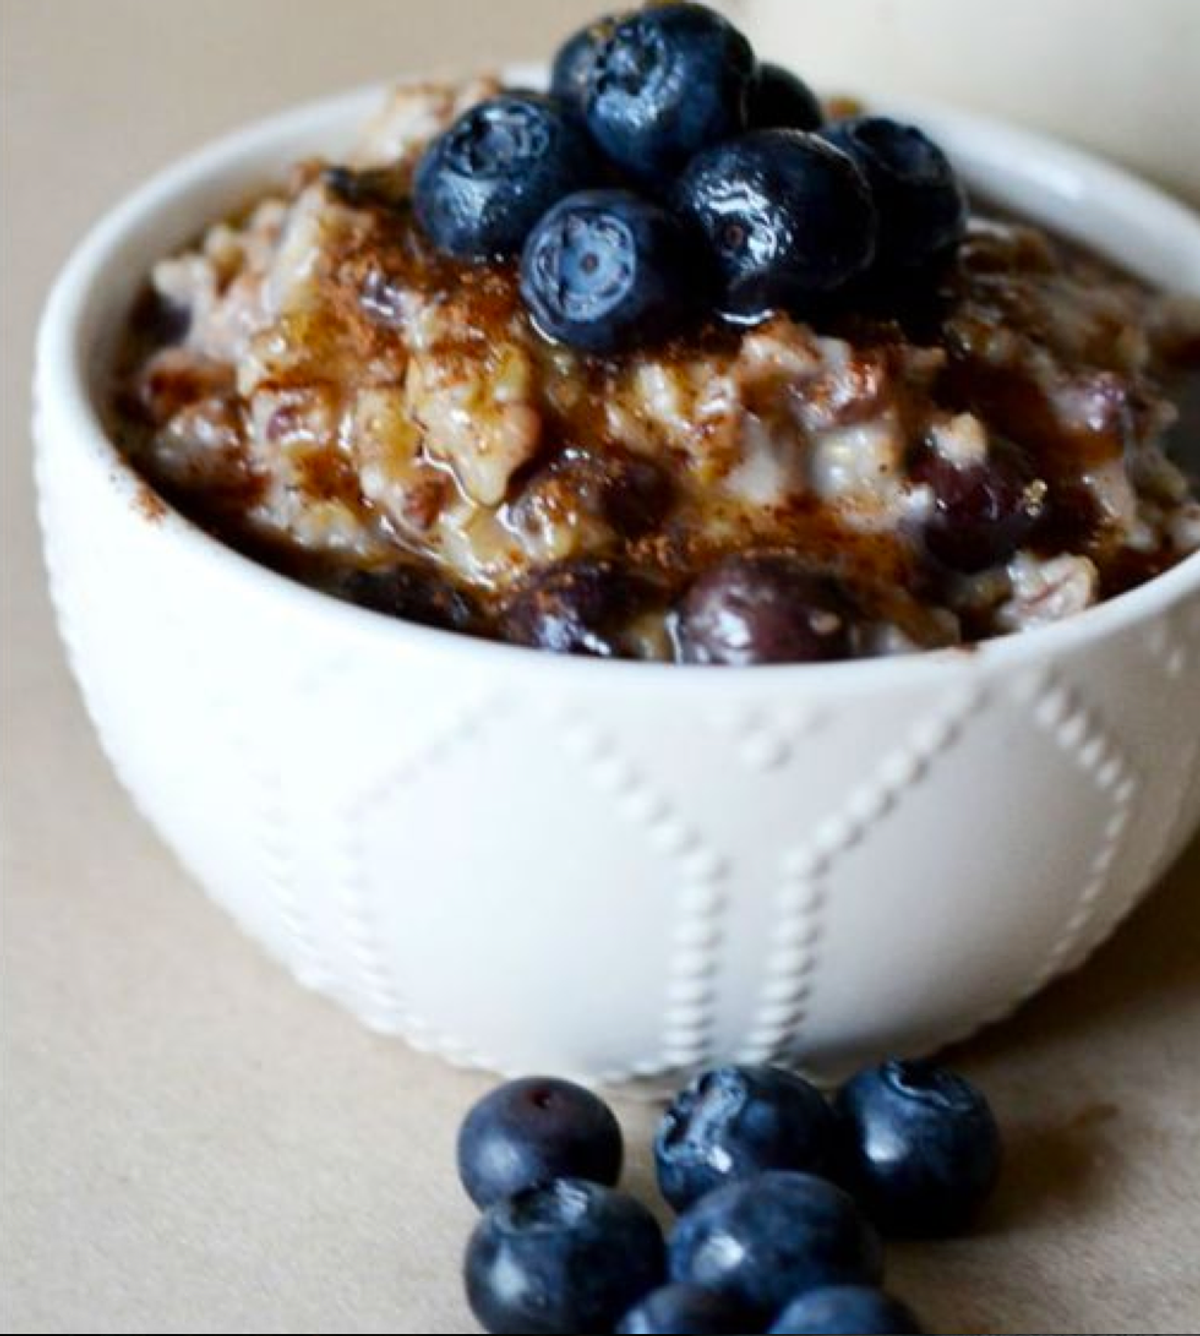 My Favorite Healthy (and Yummy) Breakfasts